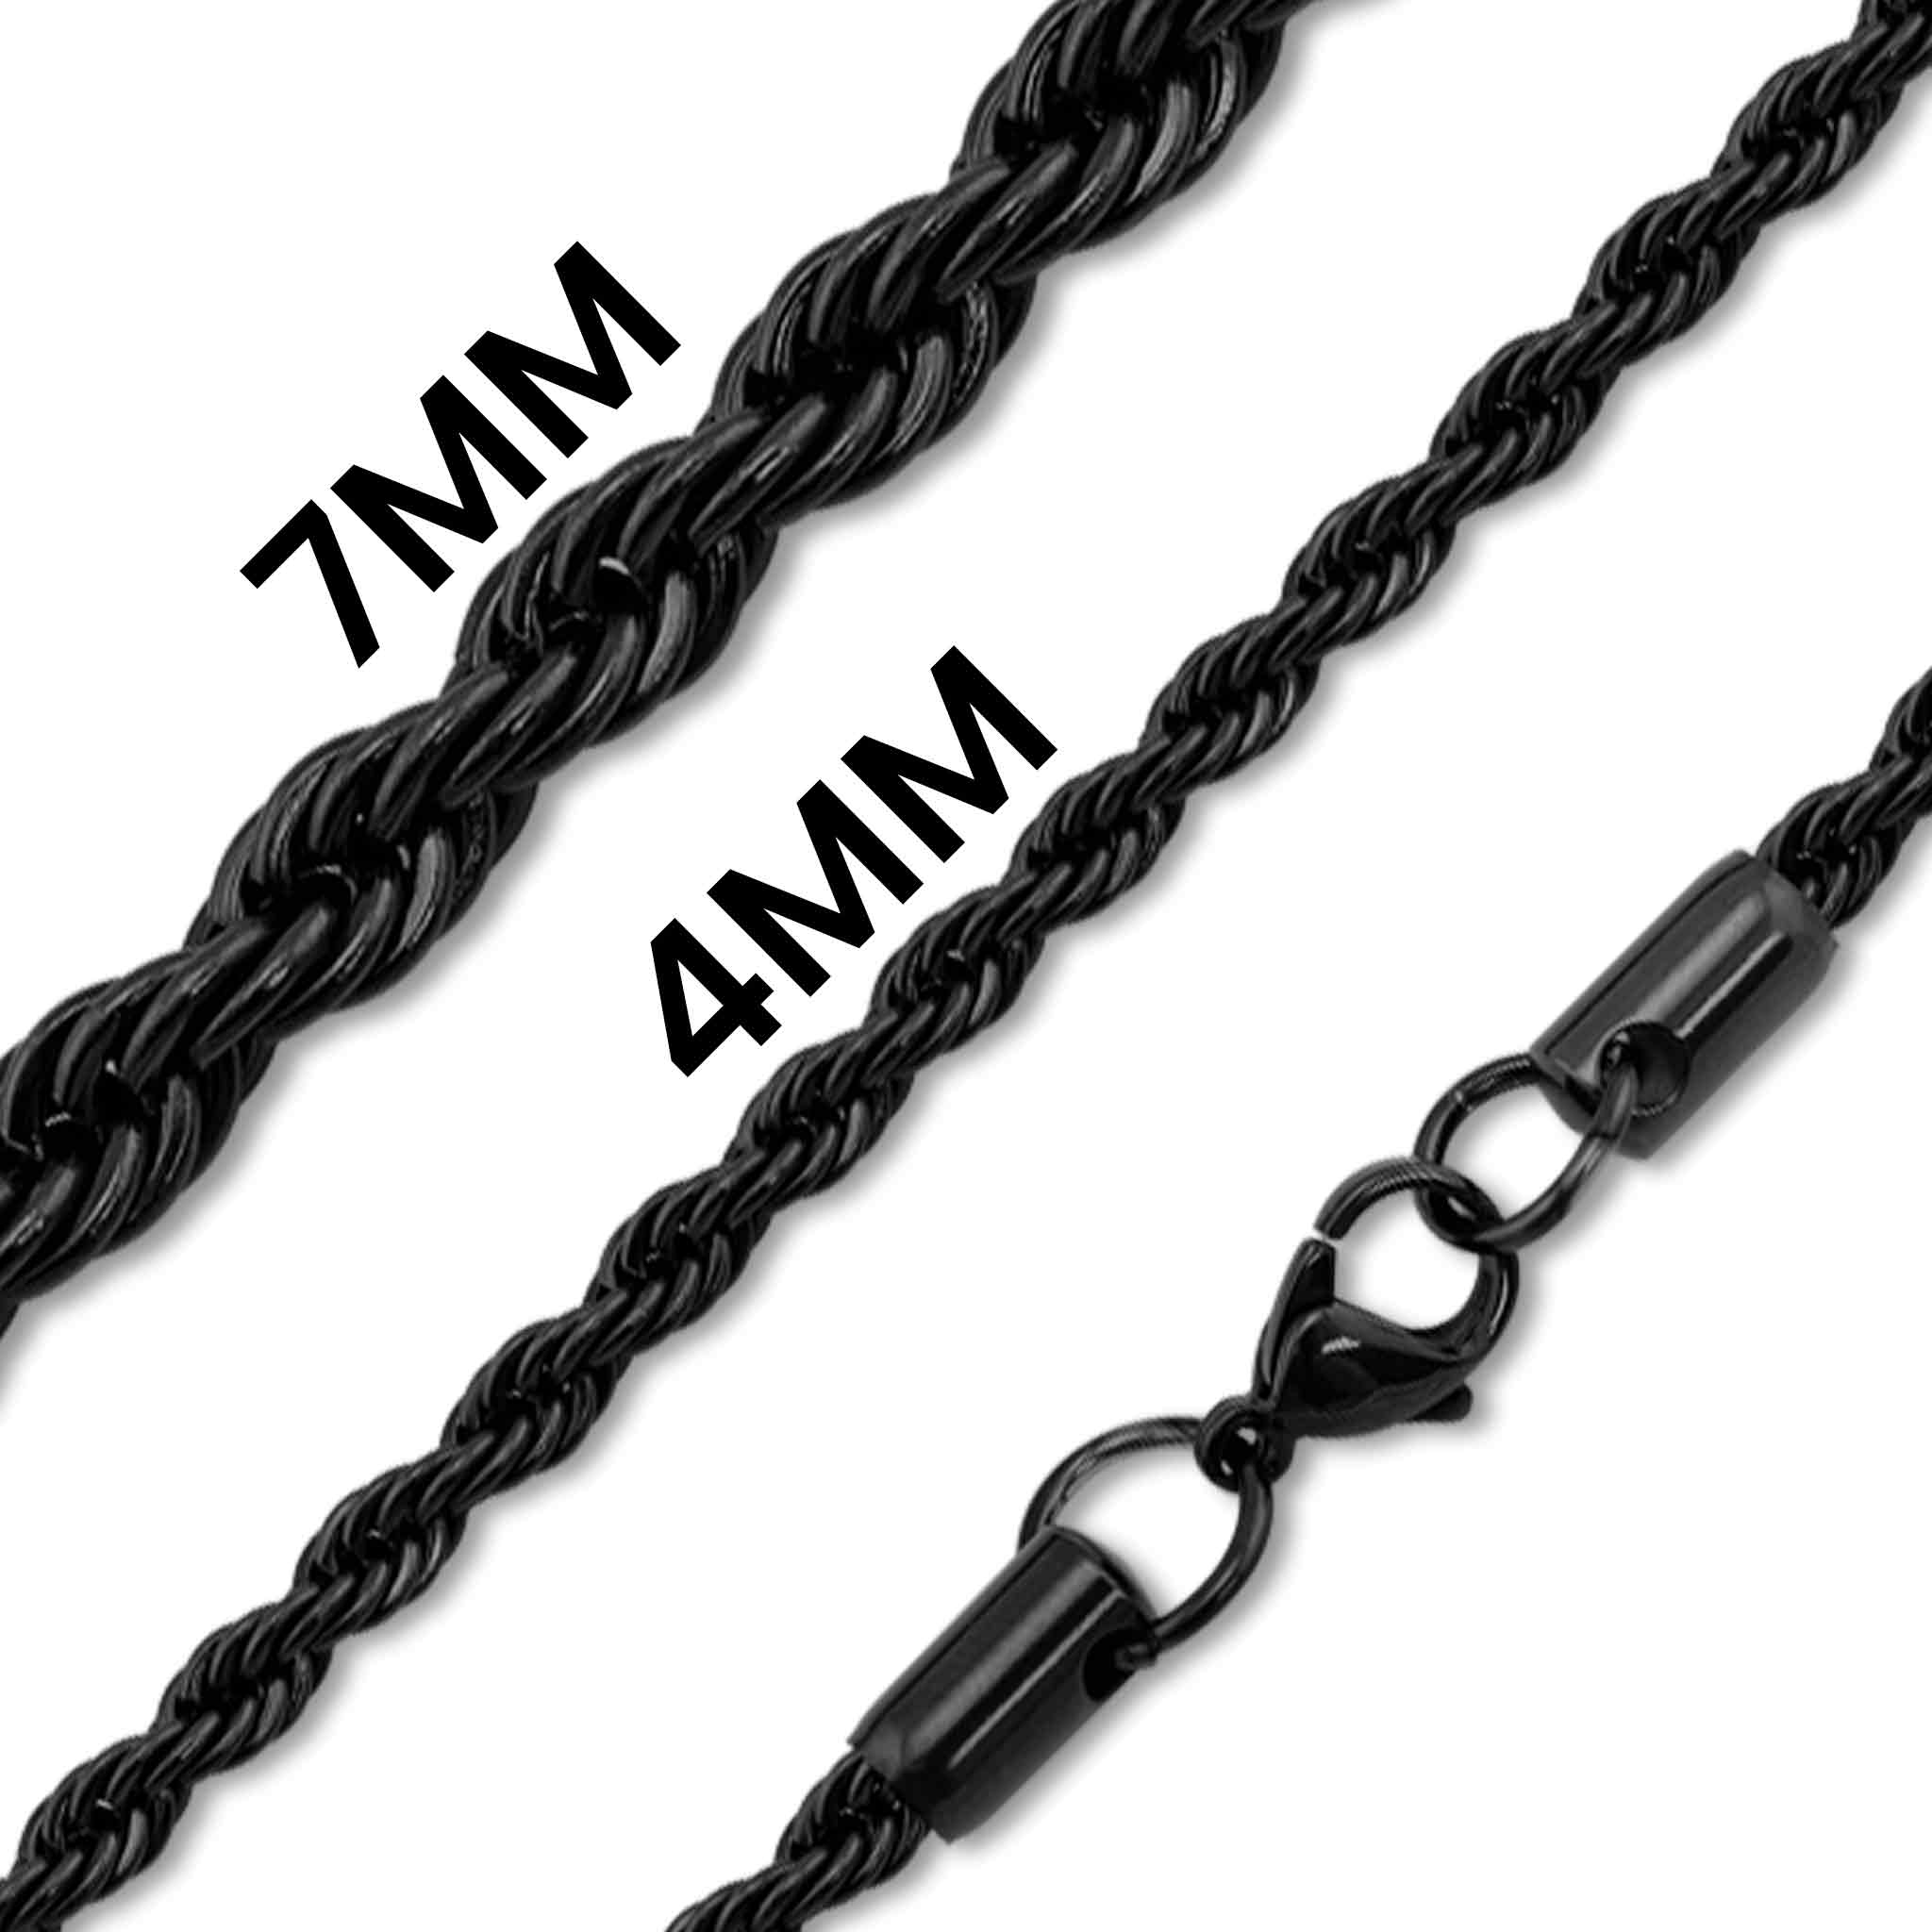 Necklaces Black Stainless Steel Rope Chain Necklace Chn9704 7mm / 24 Wholesale Jewelry Website unisex